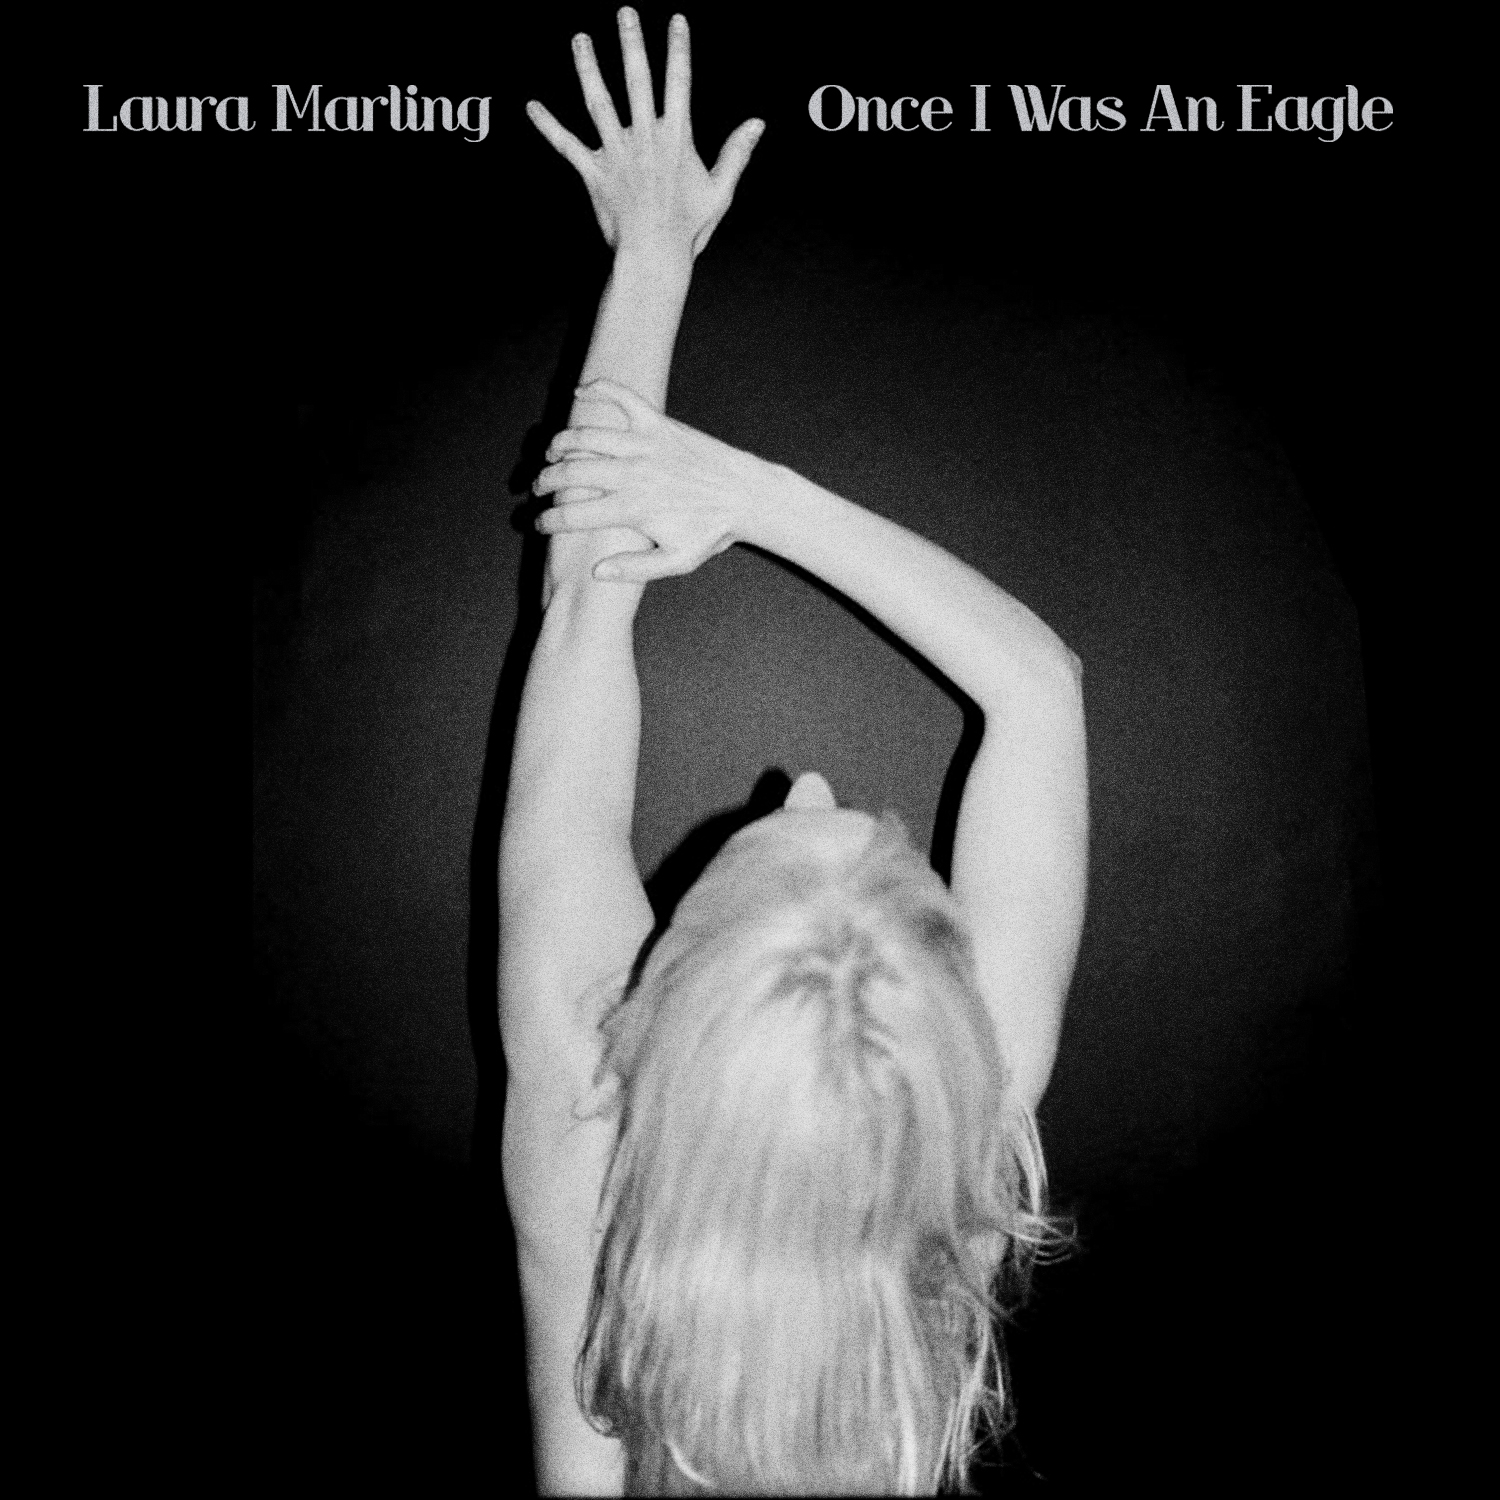 Laura-Marling---Once-I-Was-An-Eagle---Albumcover.jpg